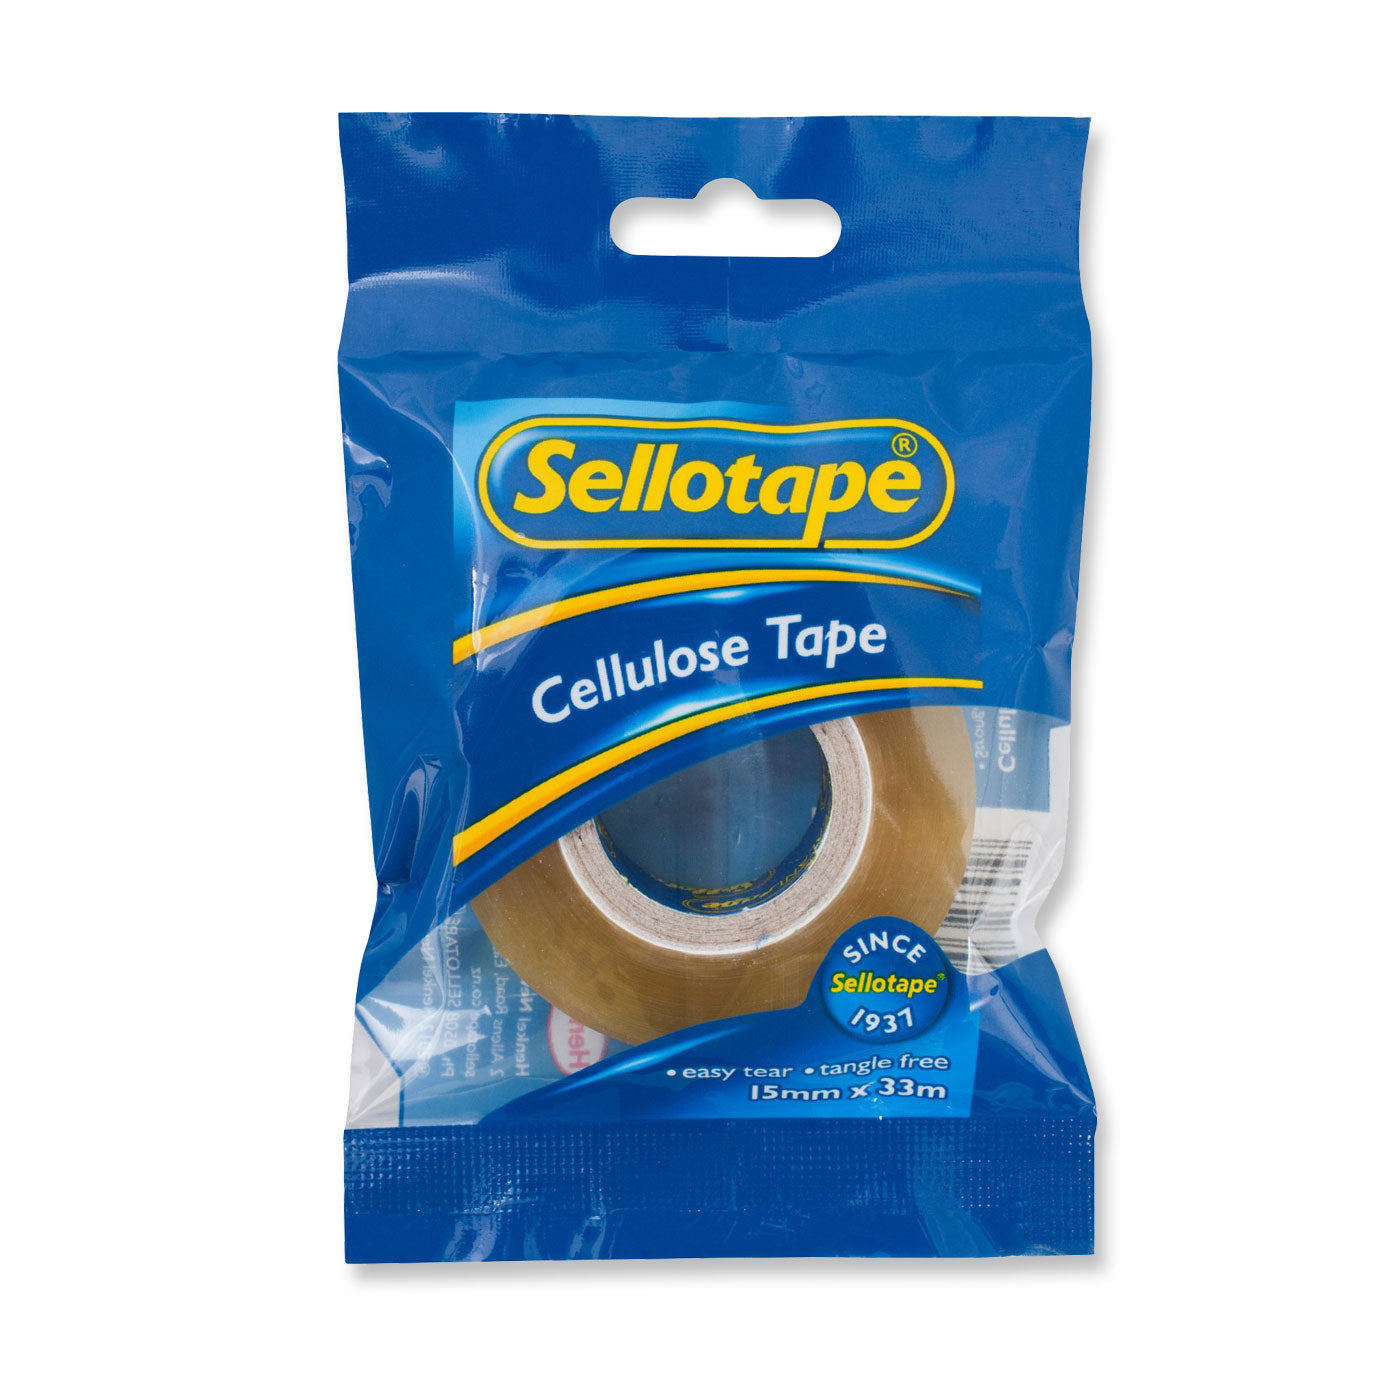 Sellotape 1100 Cellulose Tape 12mm x 33m